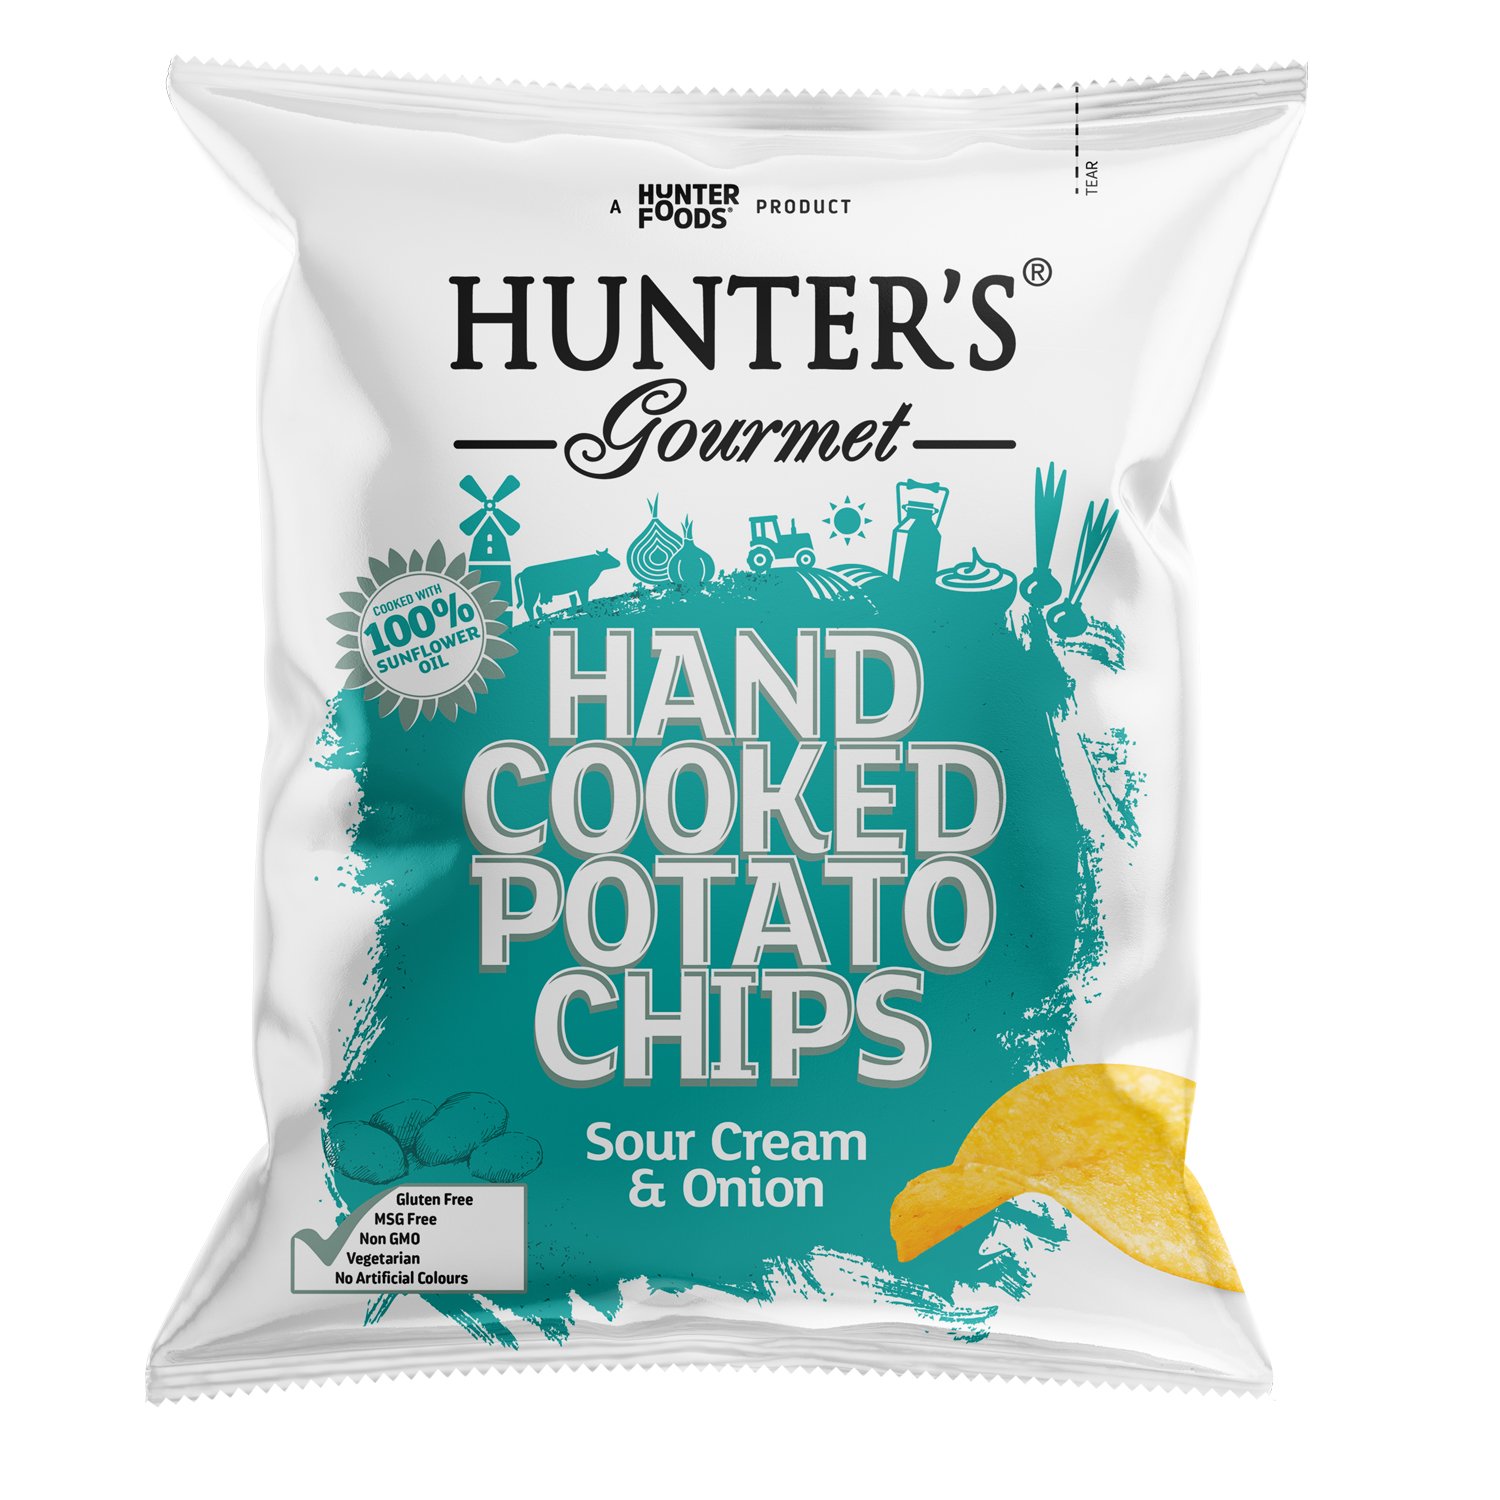 Hunter's Gourmet Hand Cooked Potato Chips